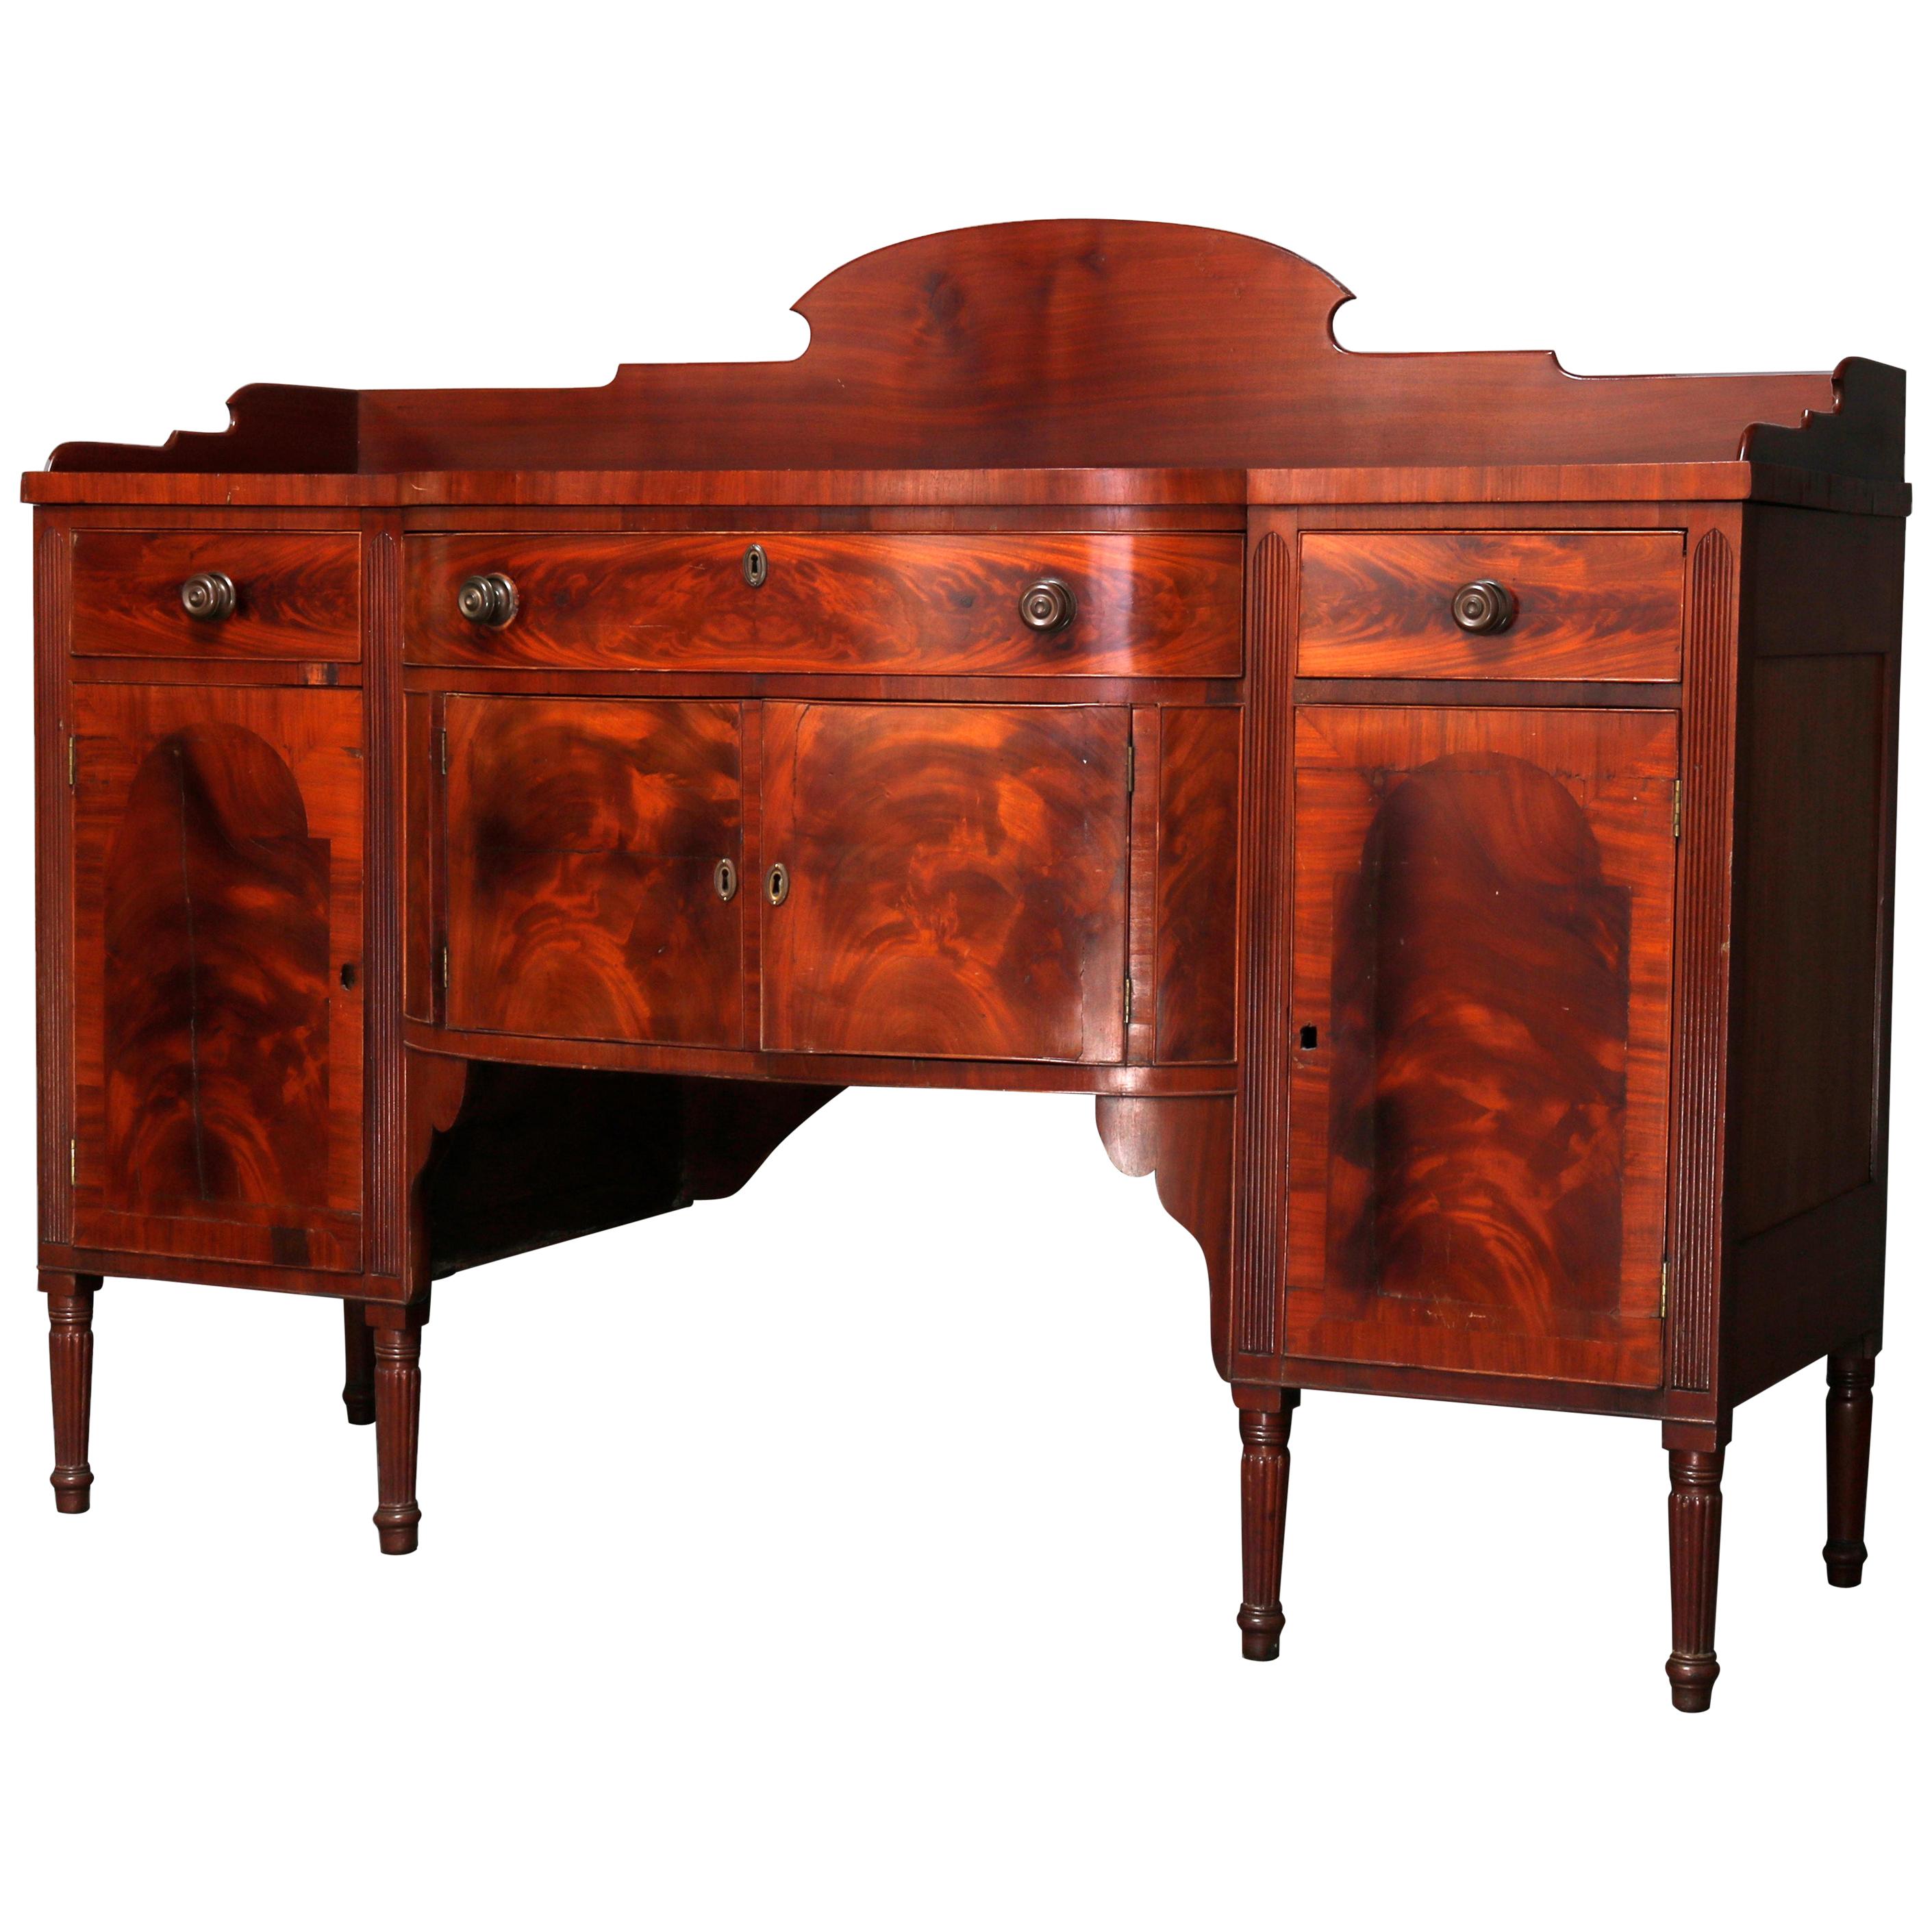 Antique Period Sheraton Flame Mahogany Bow-Front Sideboard, 19th Century